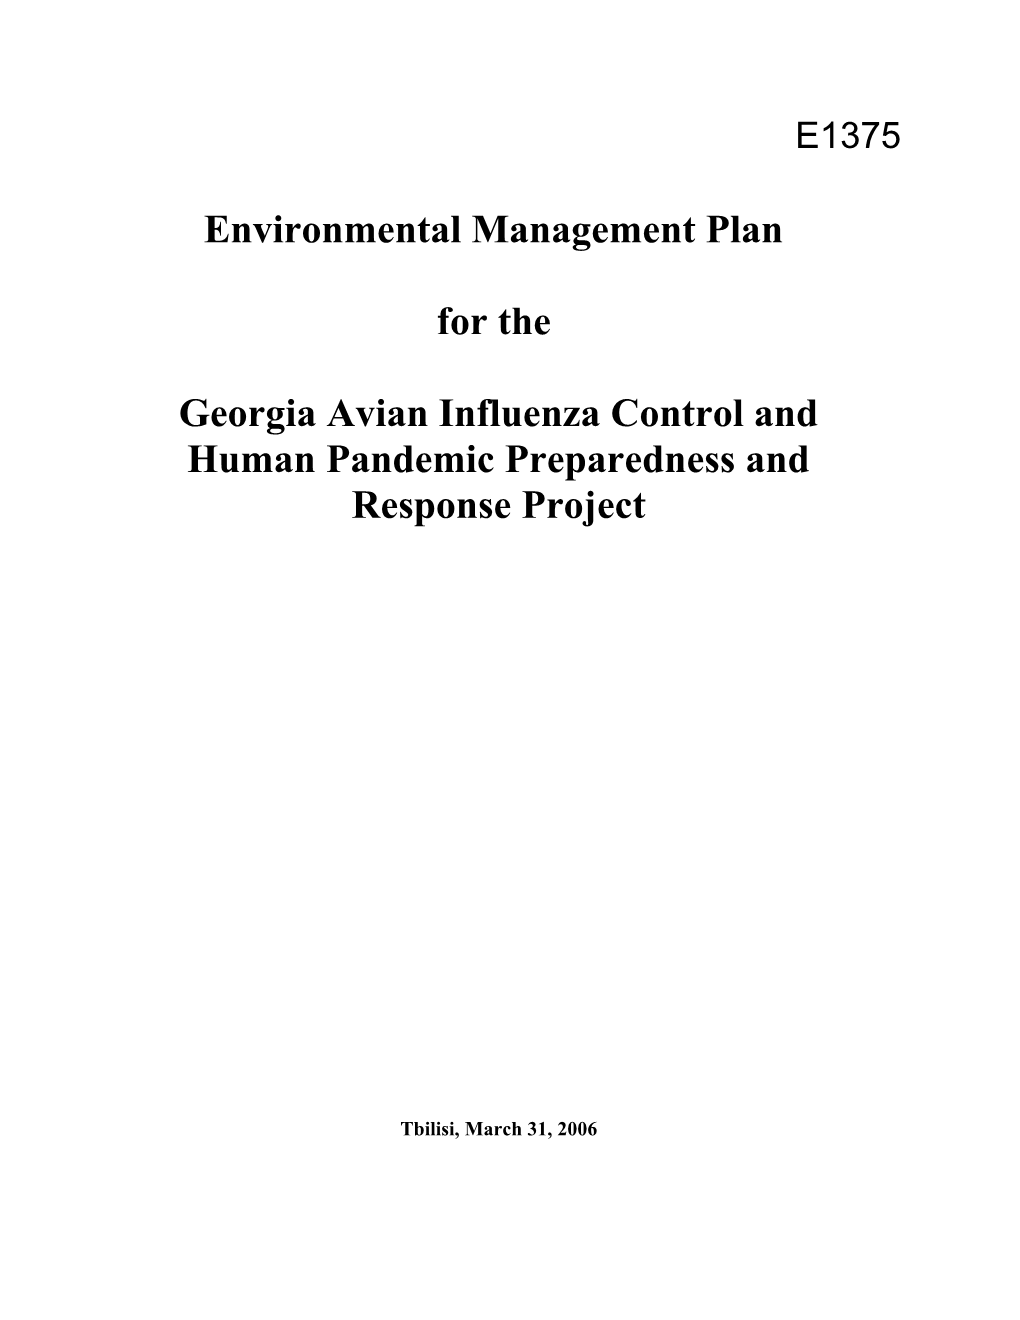 Georgia Avian Influenza Control and Human Pandemic Preparedness and Response Project